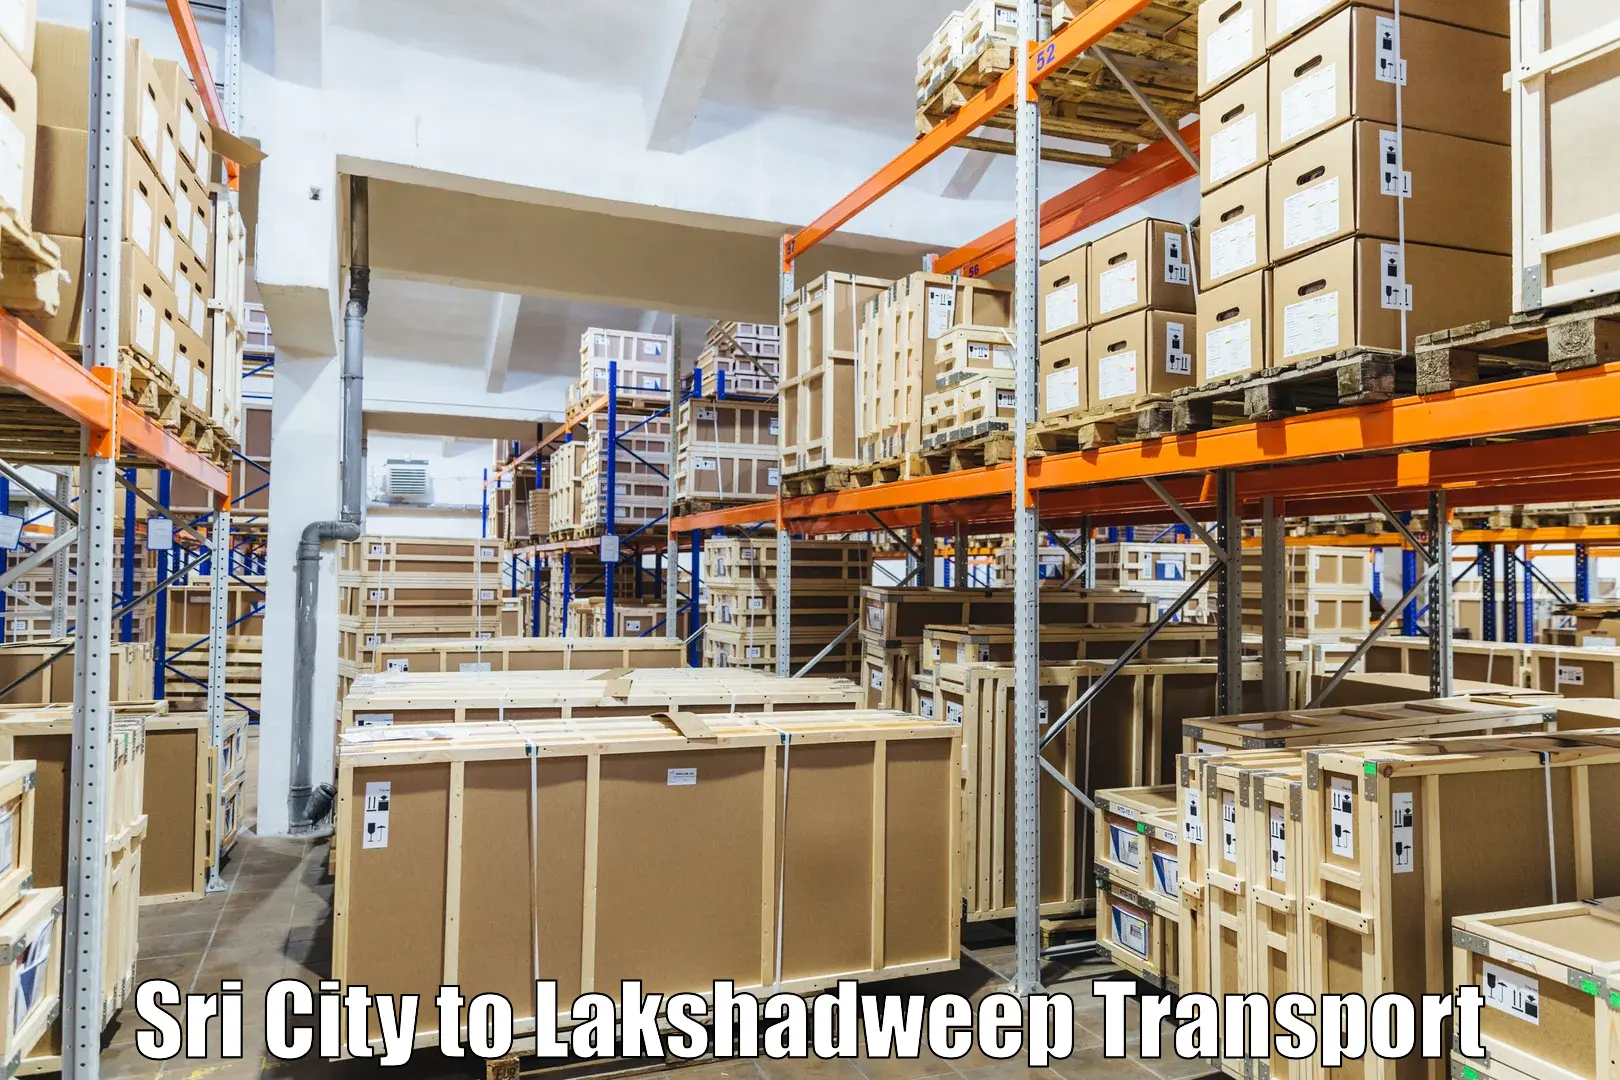 Nationwide transport services in Sri City to Lakshadweep